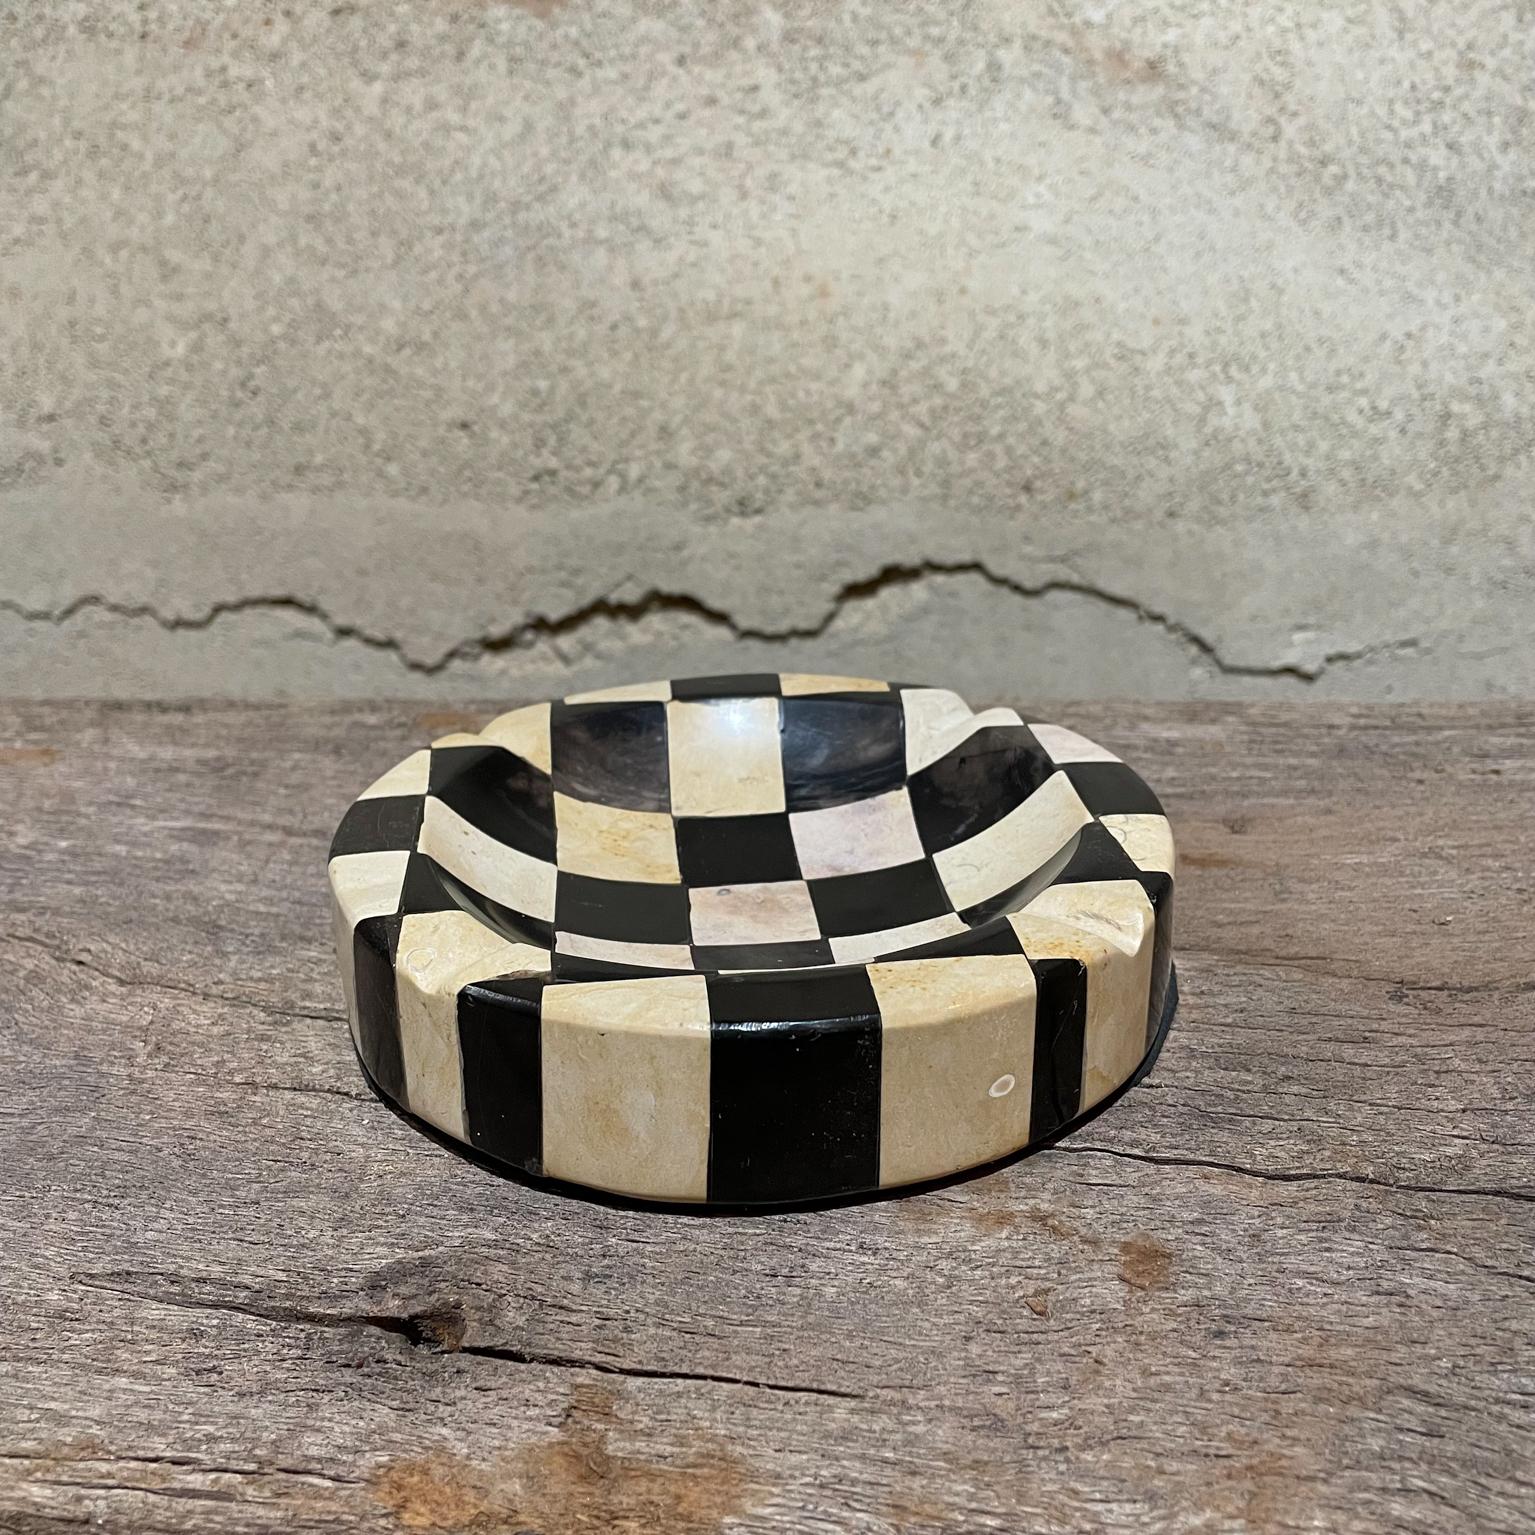 Modernist black & white checkered marble stone tile ashtray 1960s vintage
Mid century mod meets Hollywood Regency
Unmarked
Measures: 6 diameter x 1.5 tall inches
Preowned unrestored original vintage condition.
Please refer to our images.
 
 